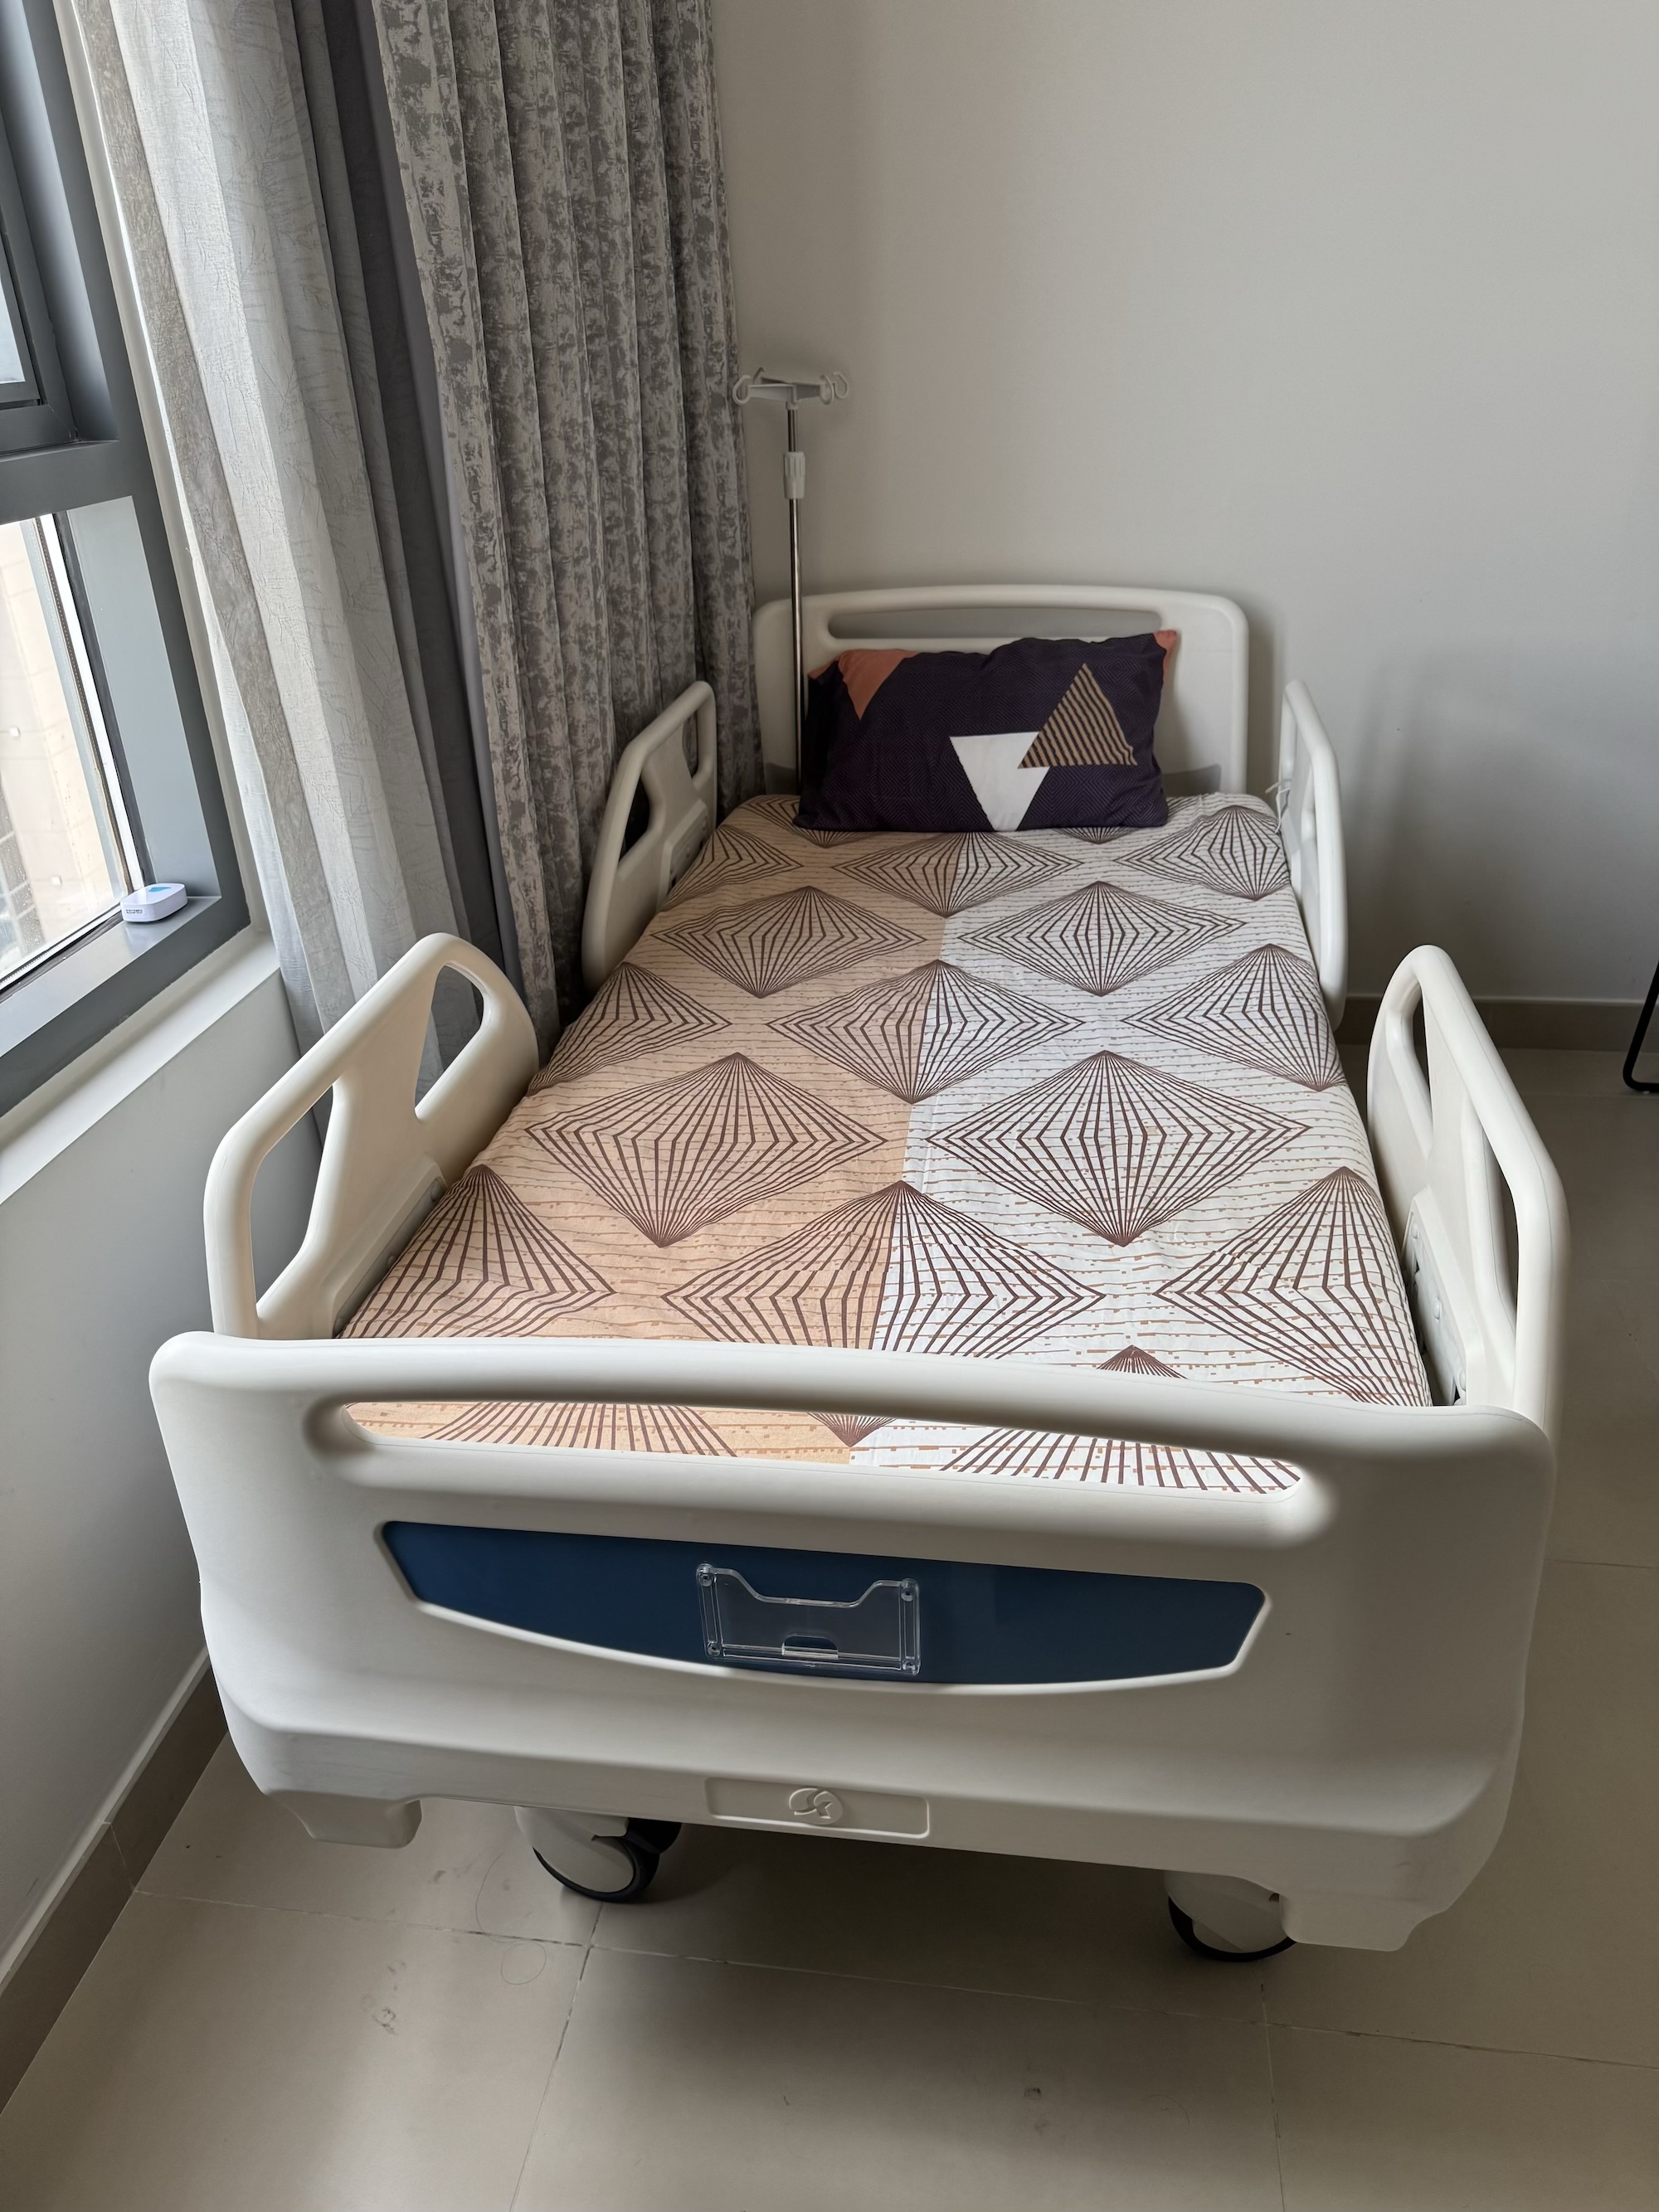 Electric 3 Function Hospital Bed In Excellent Condition